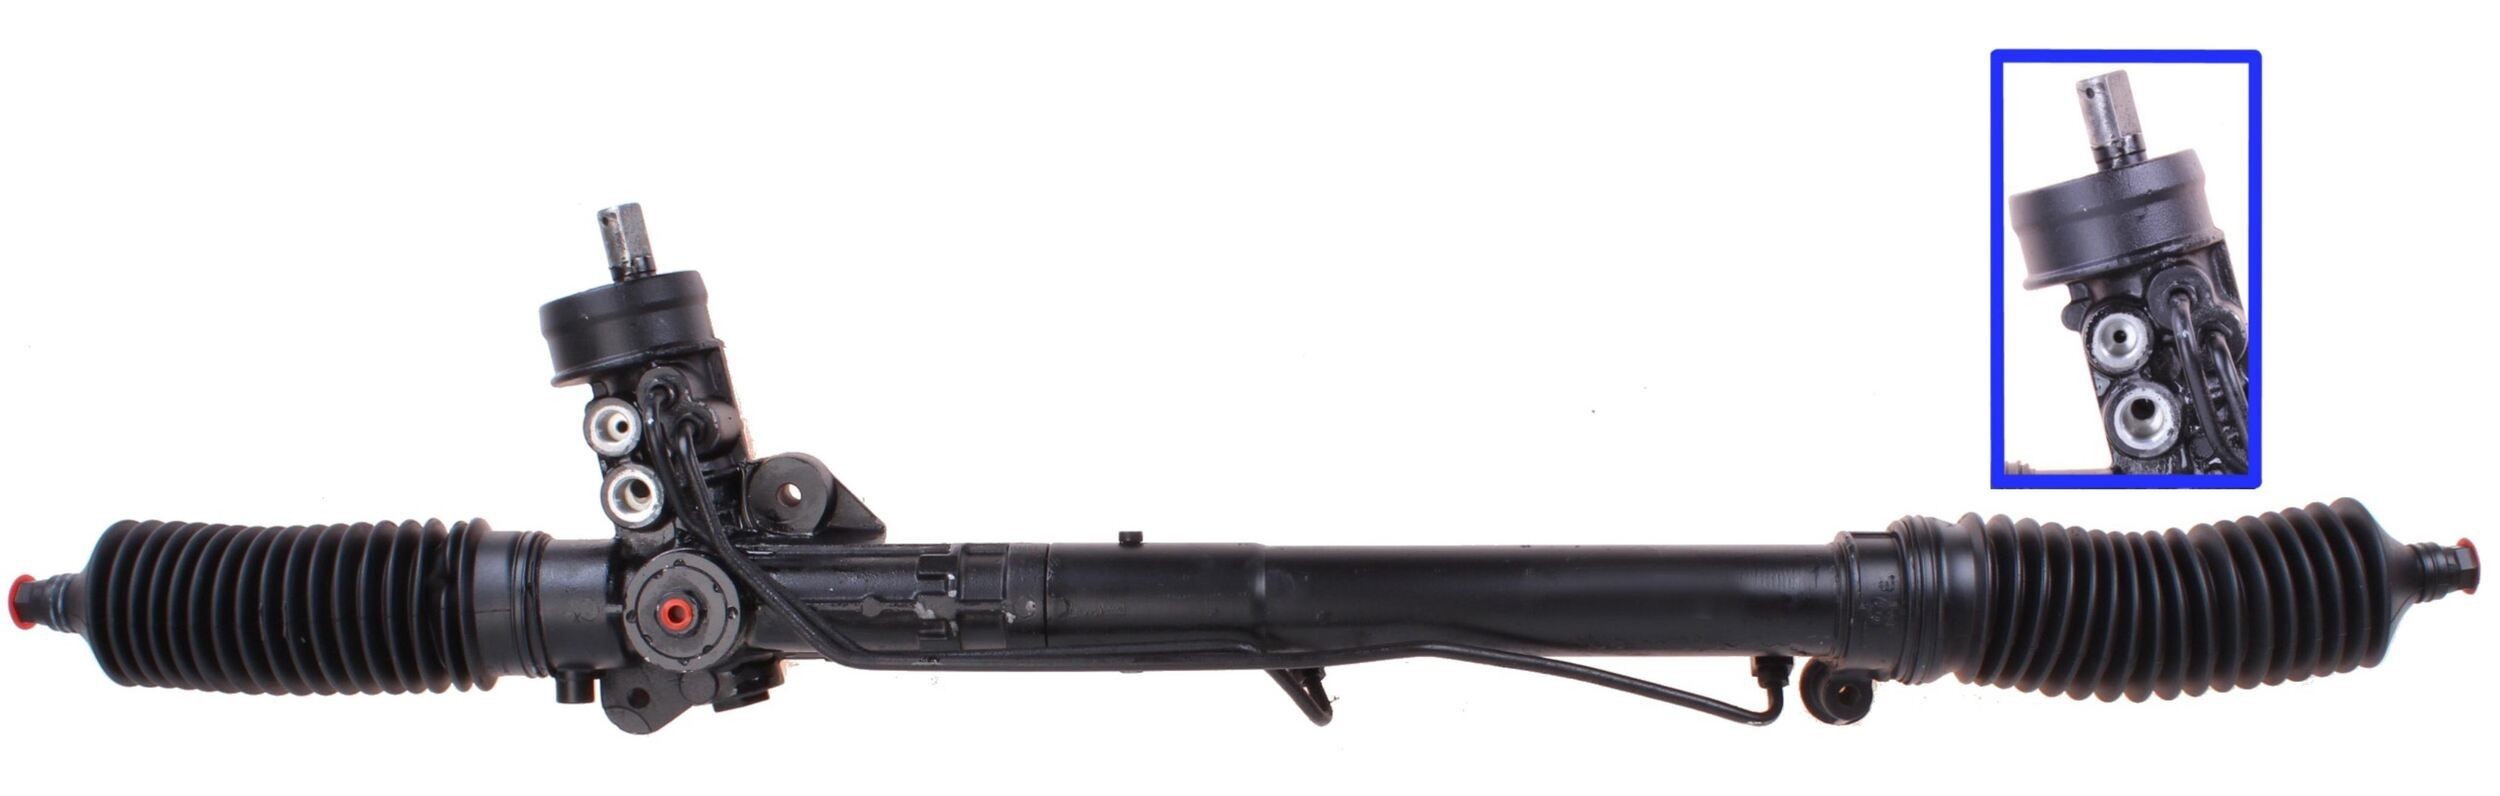 DRI 711520664 Steering rack Hydraulic, for left-hand drive vehicles, without holder, 1035 mm